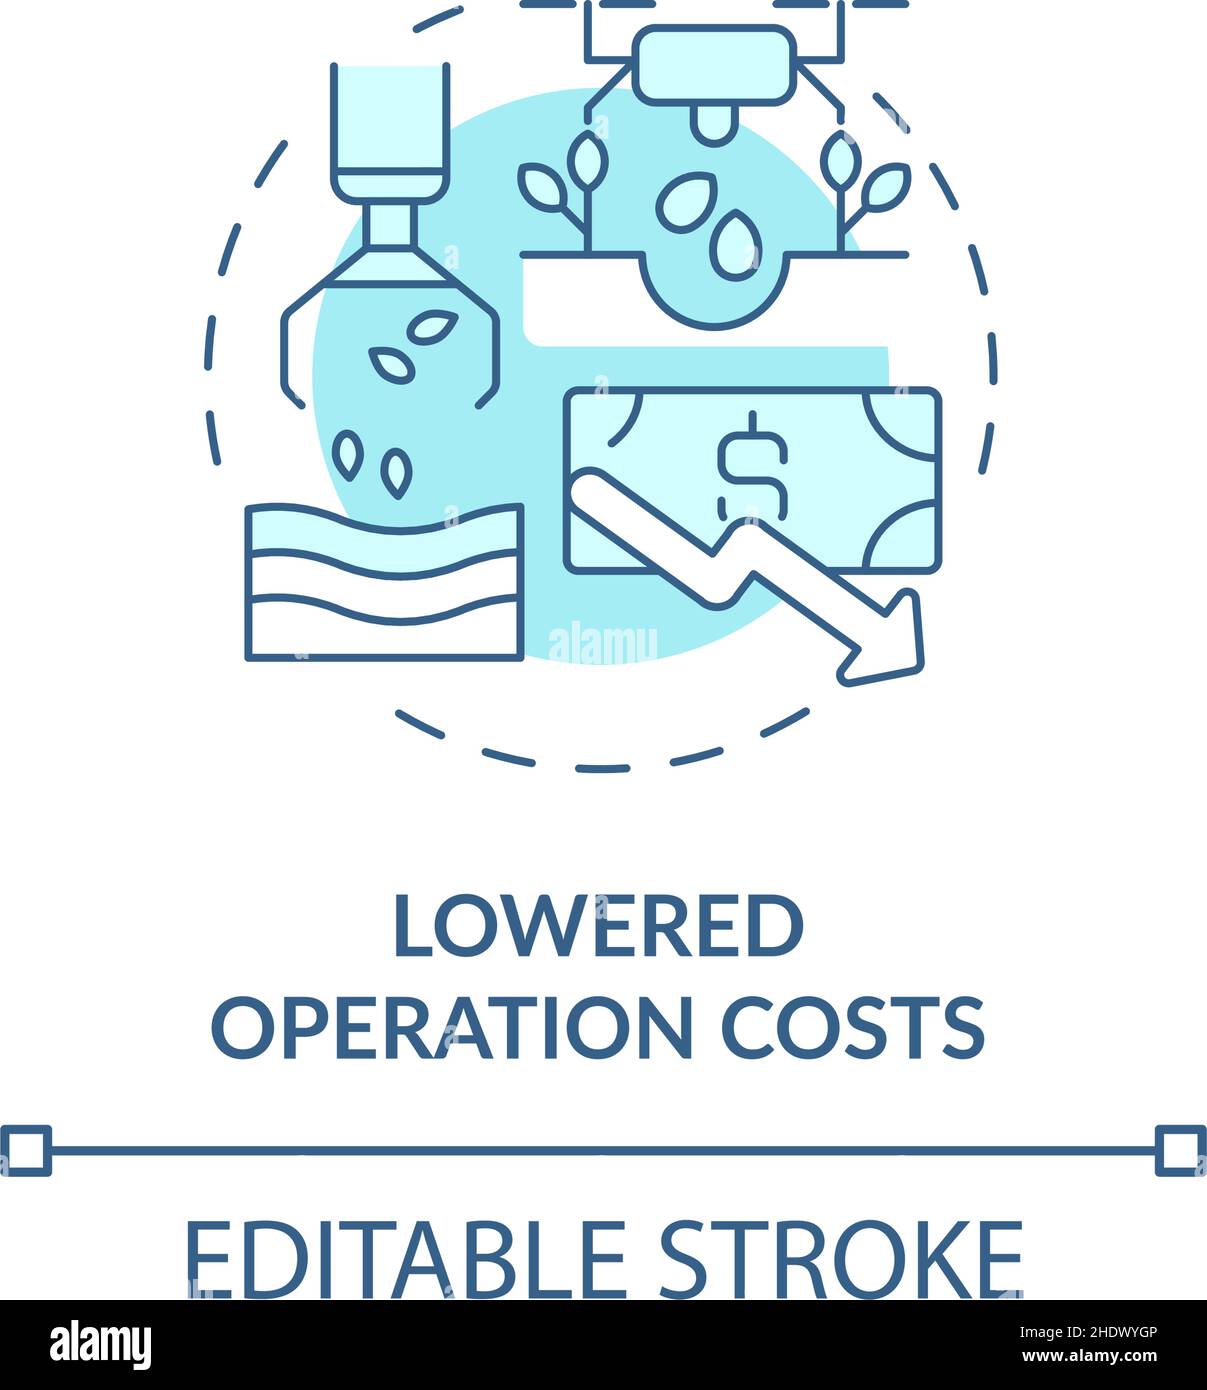 Lowered operation costs turquoise concept icon Stock Vector